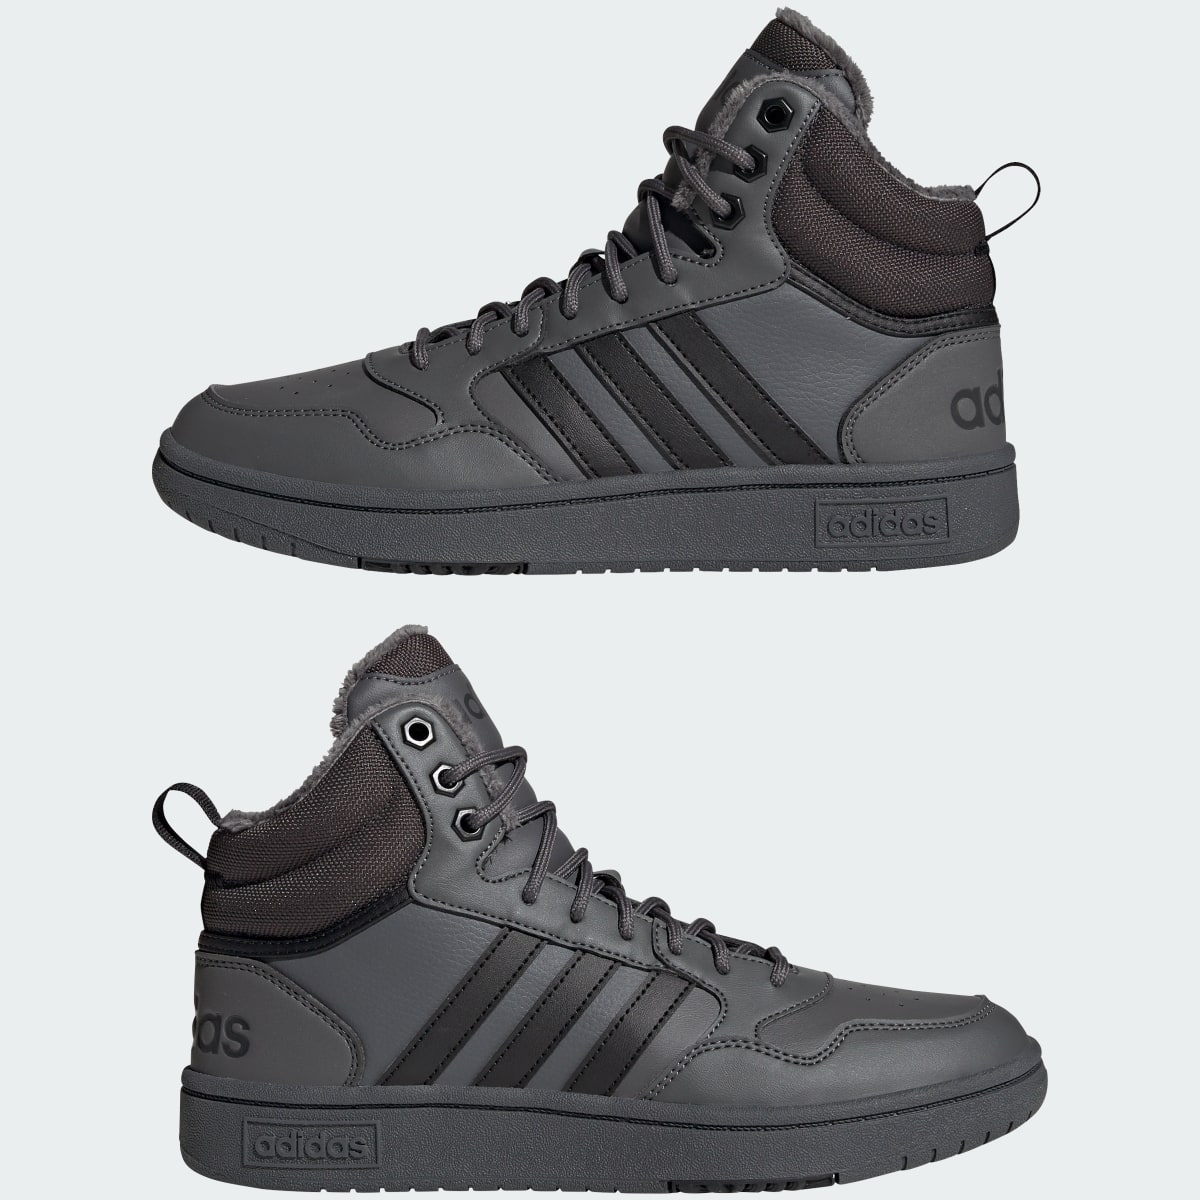 Adidas Chaussure Hoops 3.0 Mid Lifestyle Basketball Classic Fur Lining Winterized. 8